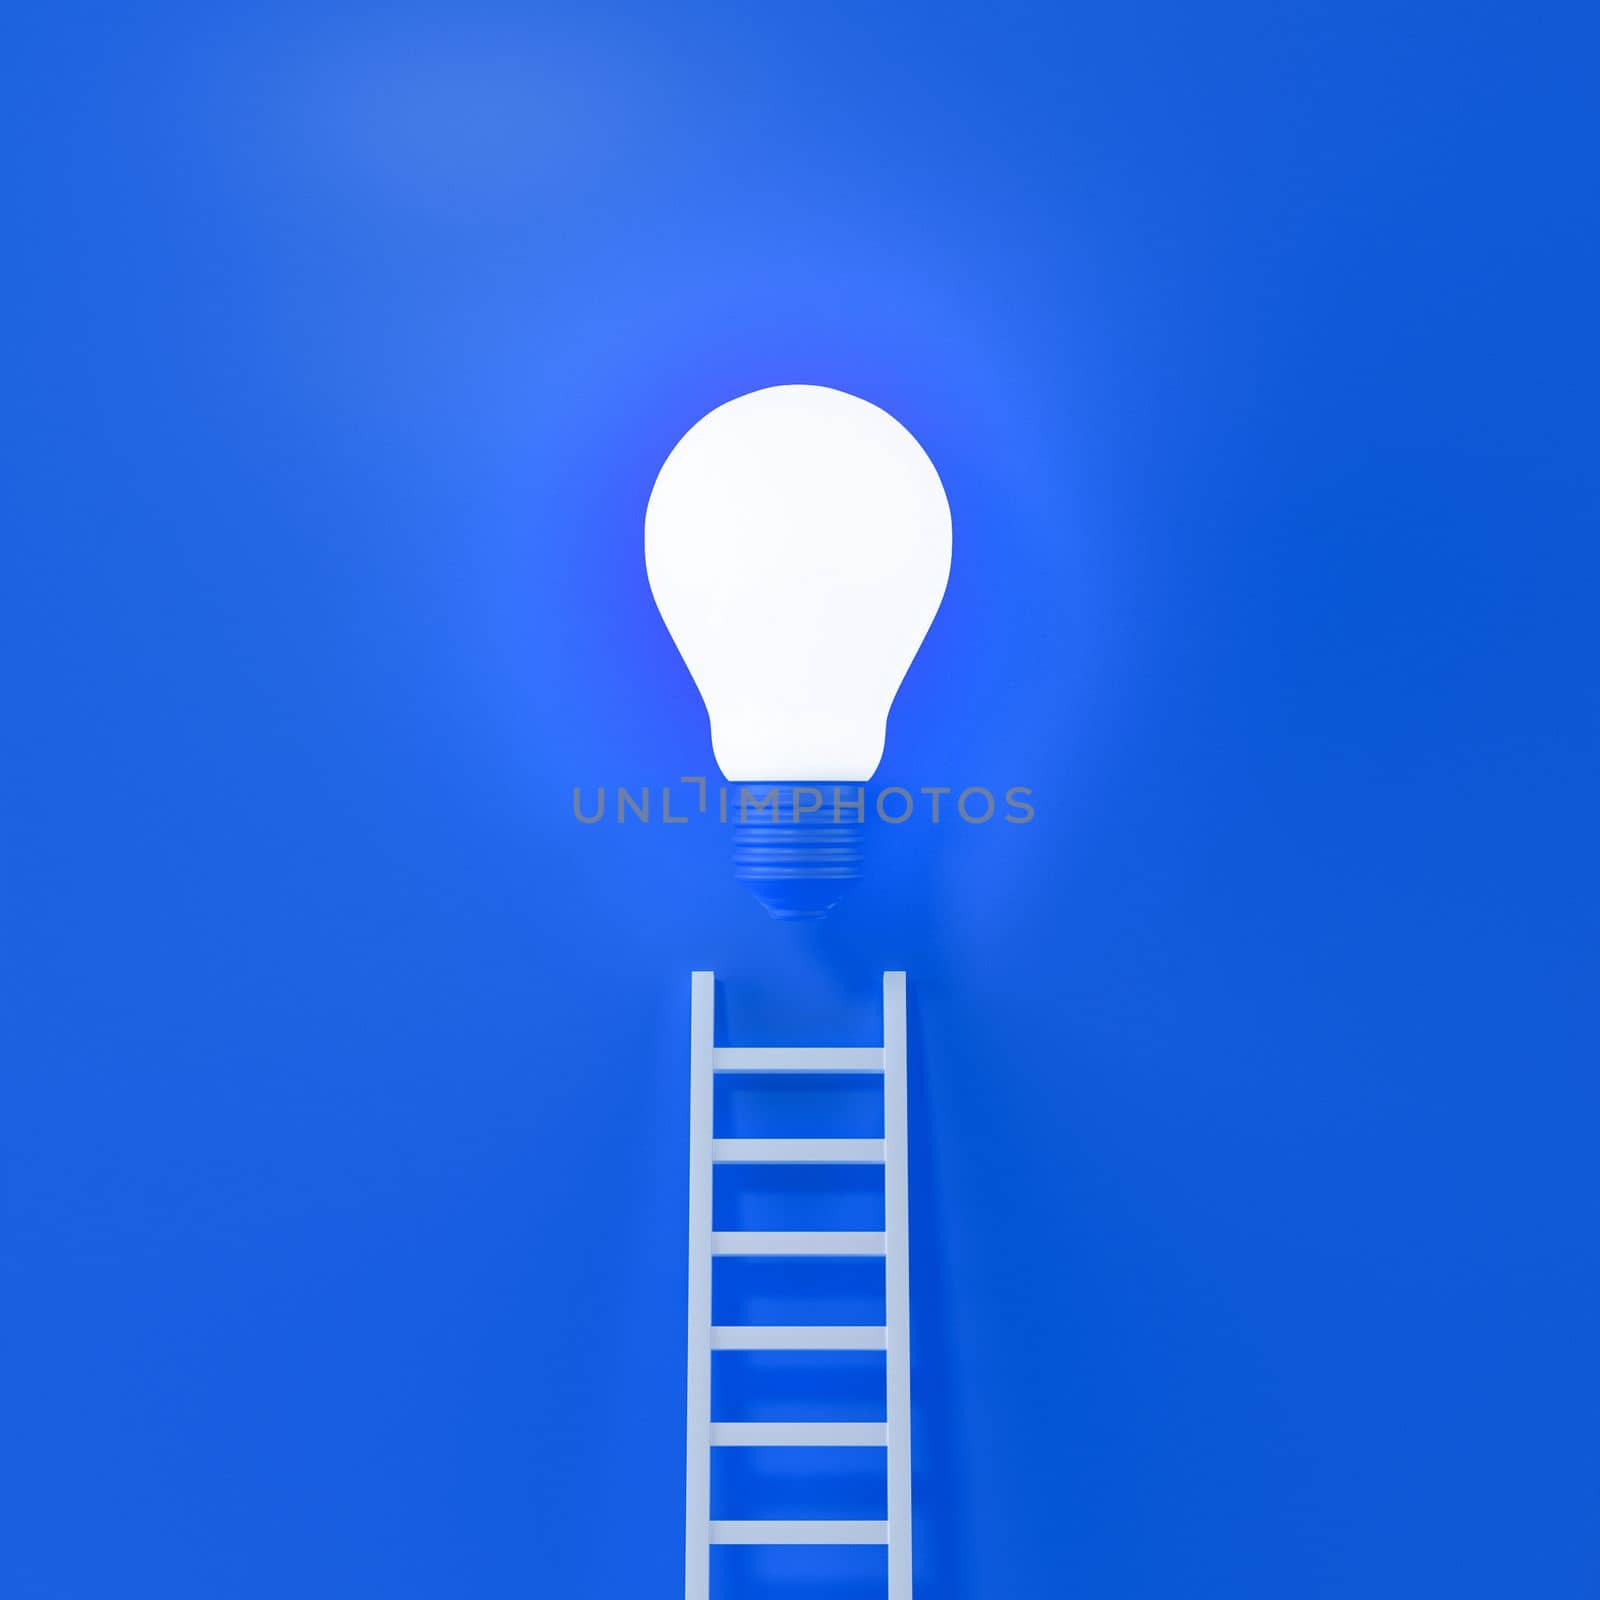 Ladder reaches up to a lit light bulb representing an Idea or business on blue background, creativity, invention concept. 3d rendering.